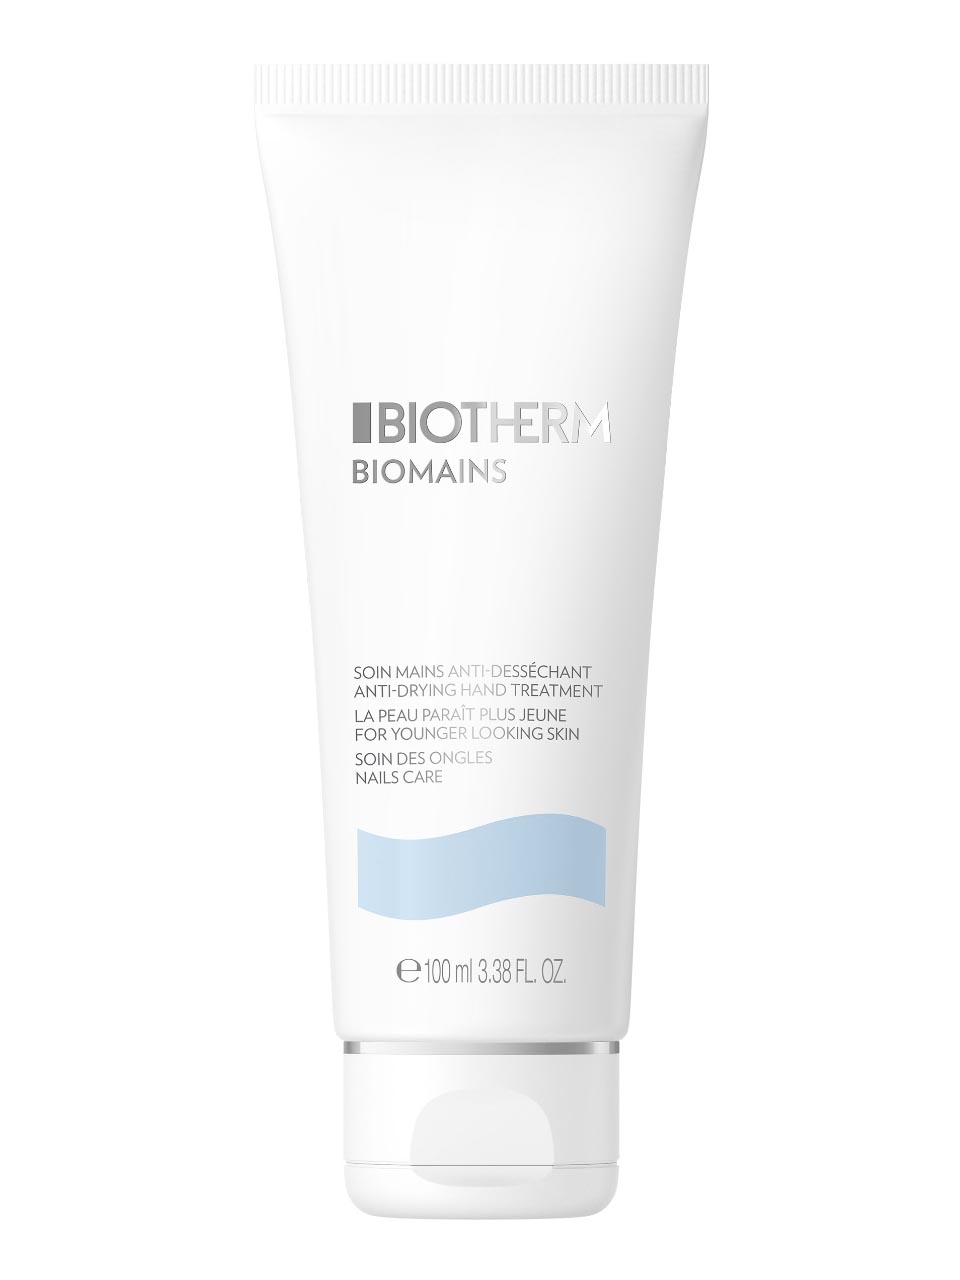 Biotherm Biomains Hand and Nail Treatment 100 ml null - onesize - 1